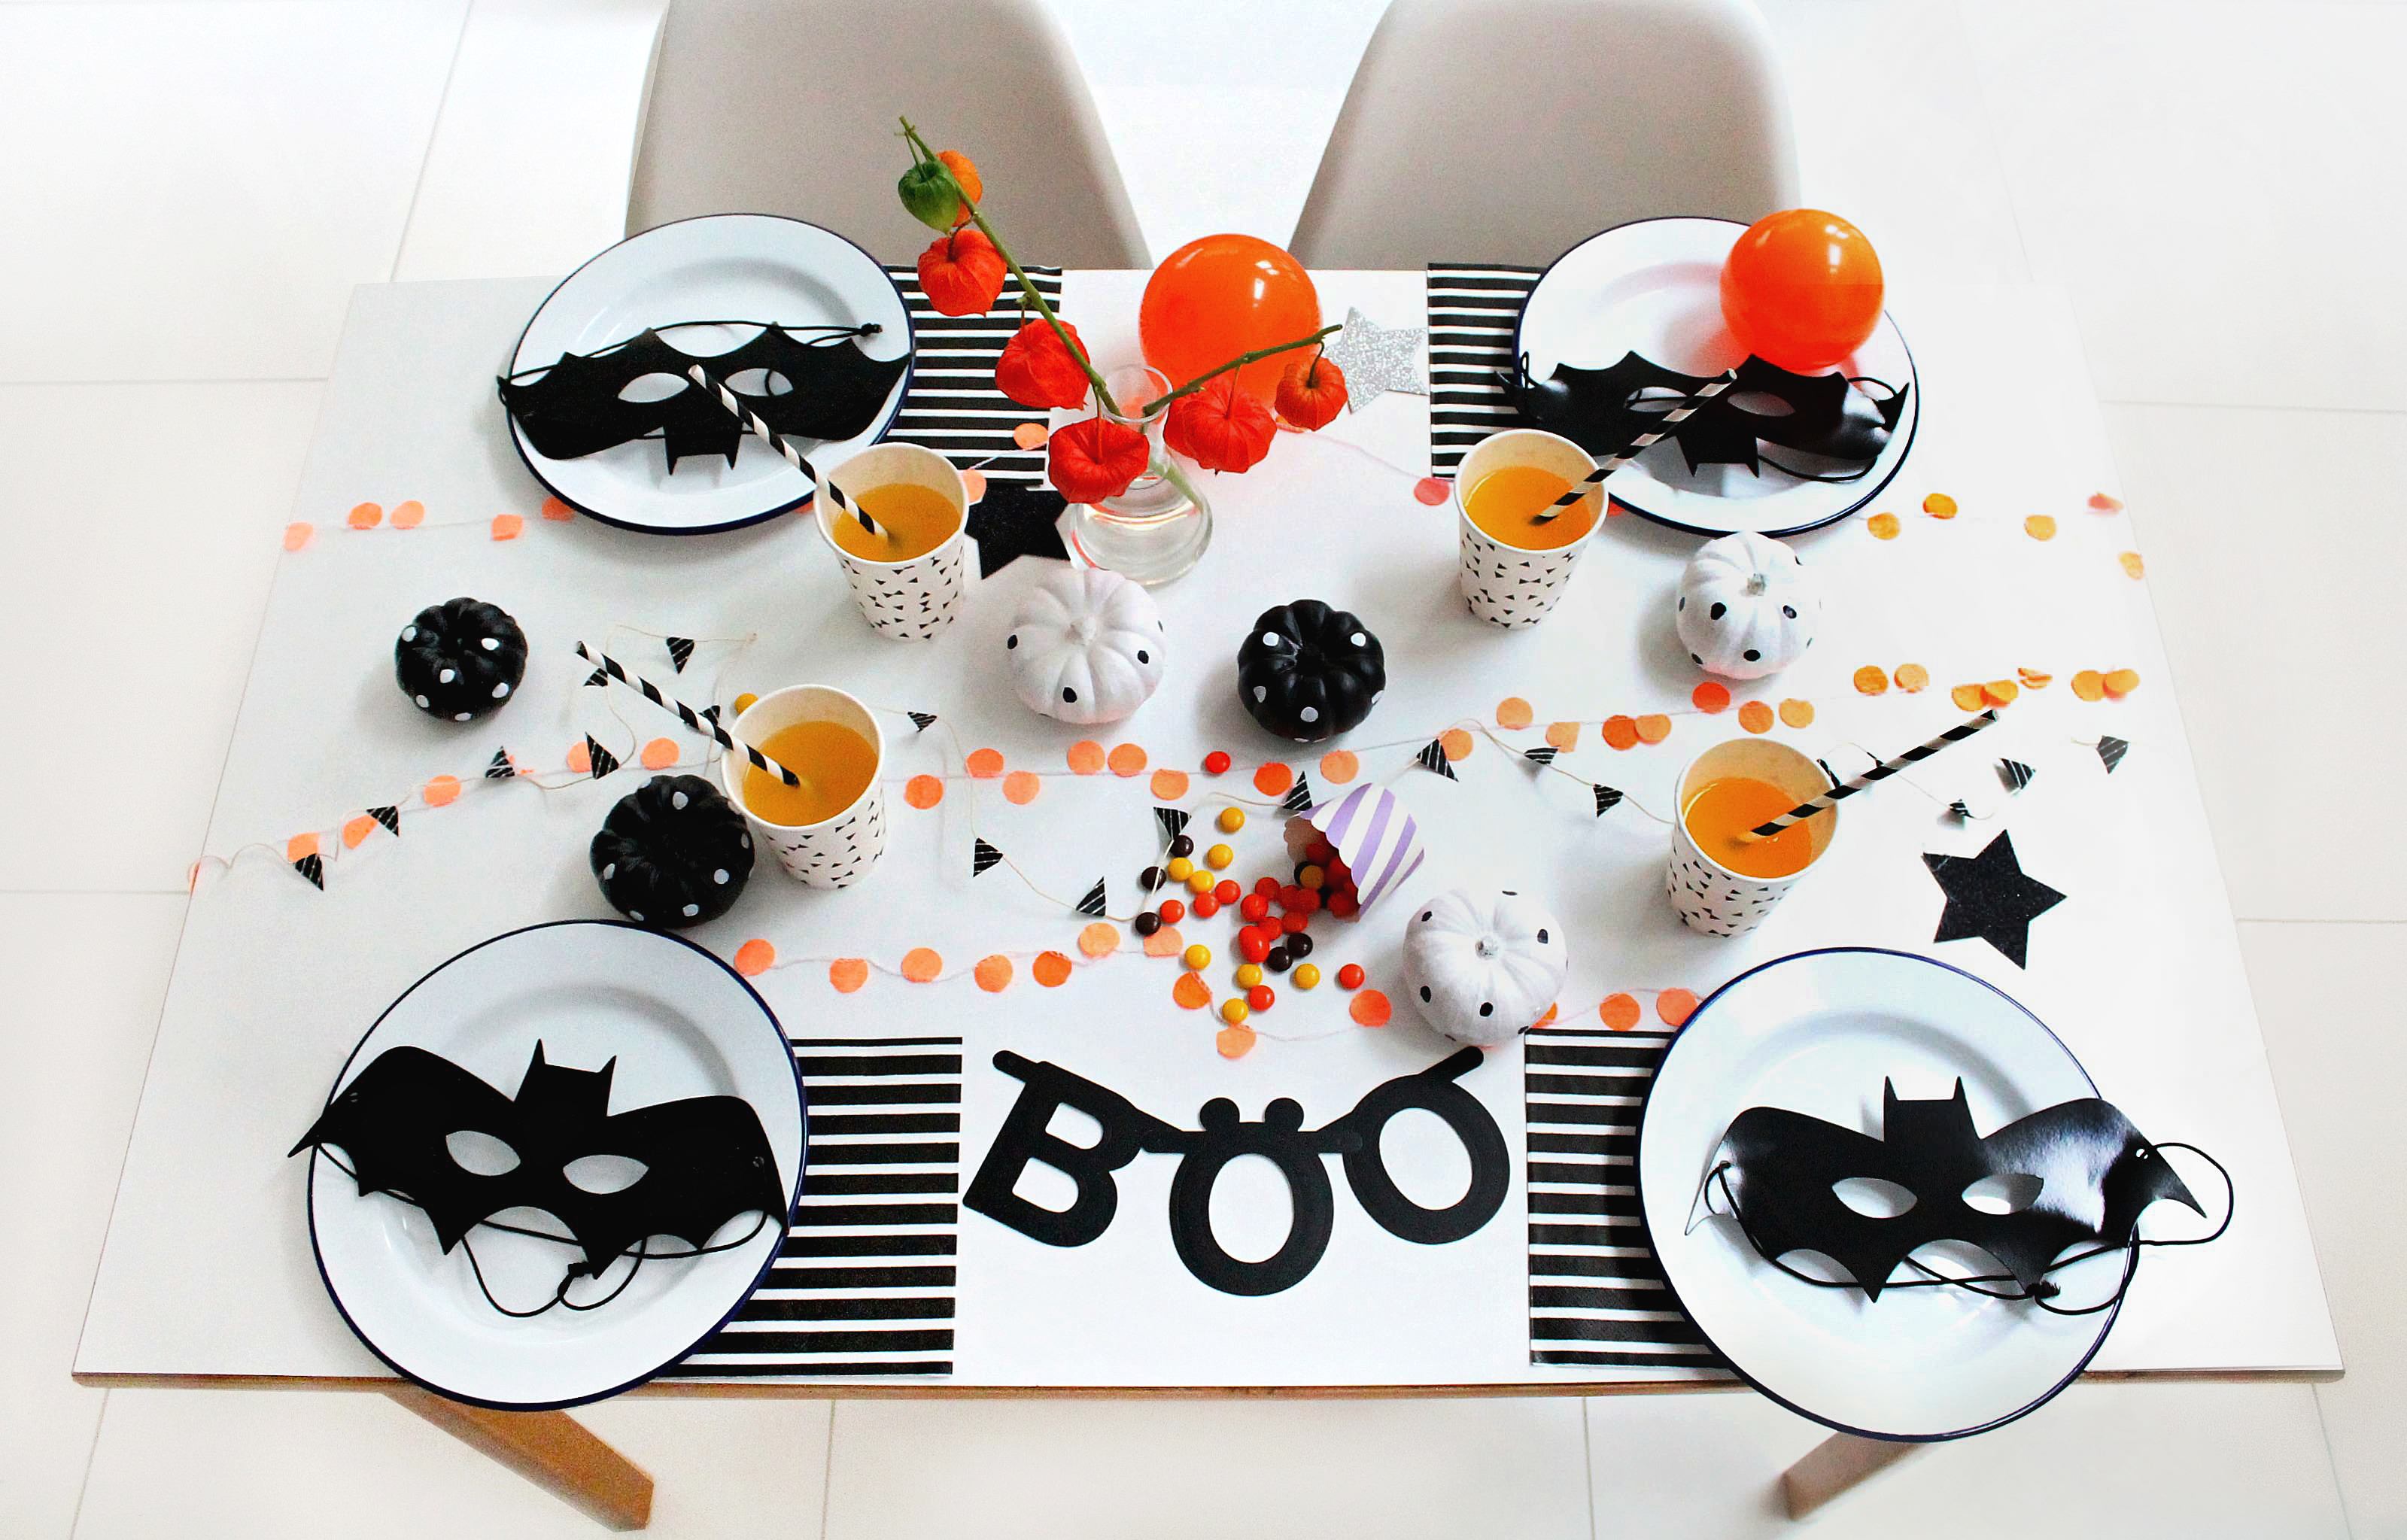 Halloween-table-by-Little-Big-Bell-styled-and-photographed-by-Geraldine_little-Big-Bell